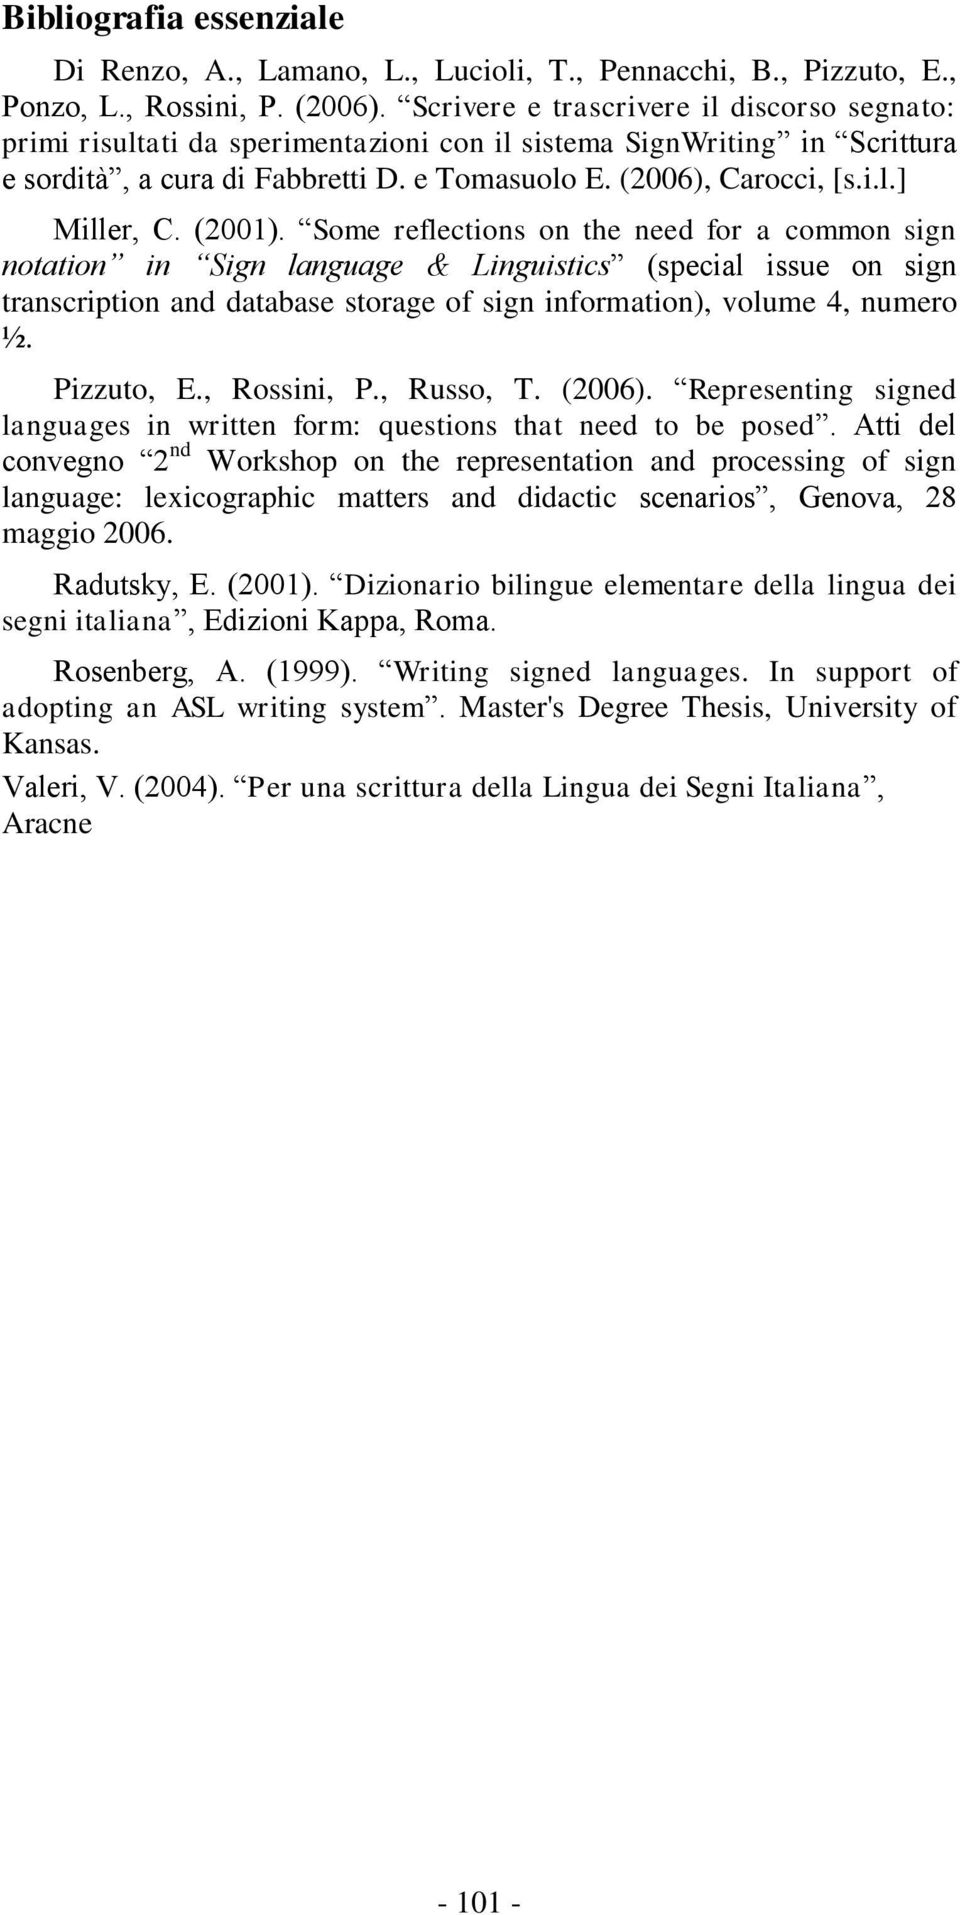 (2001). Some reflections on the need for a common sign notation in Sign language & Linguistics (special issue on sign transcription and database storage of sign information), volume 4, numero ½.